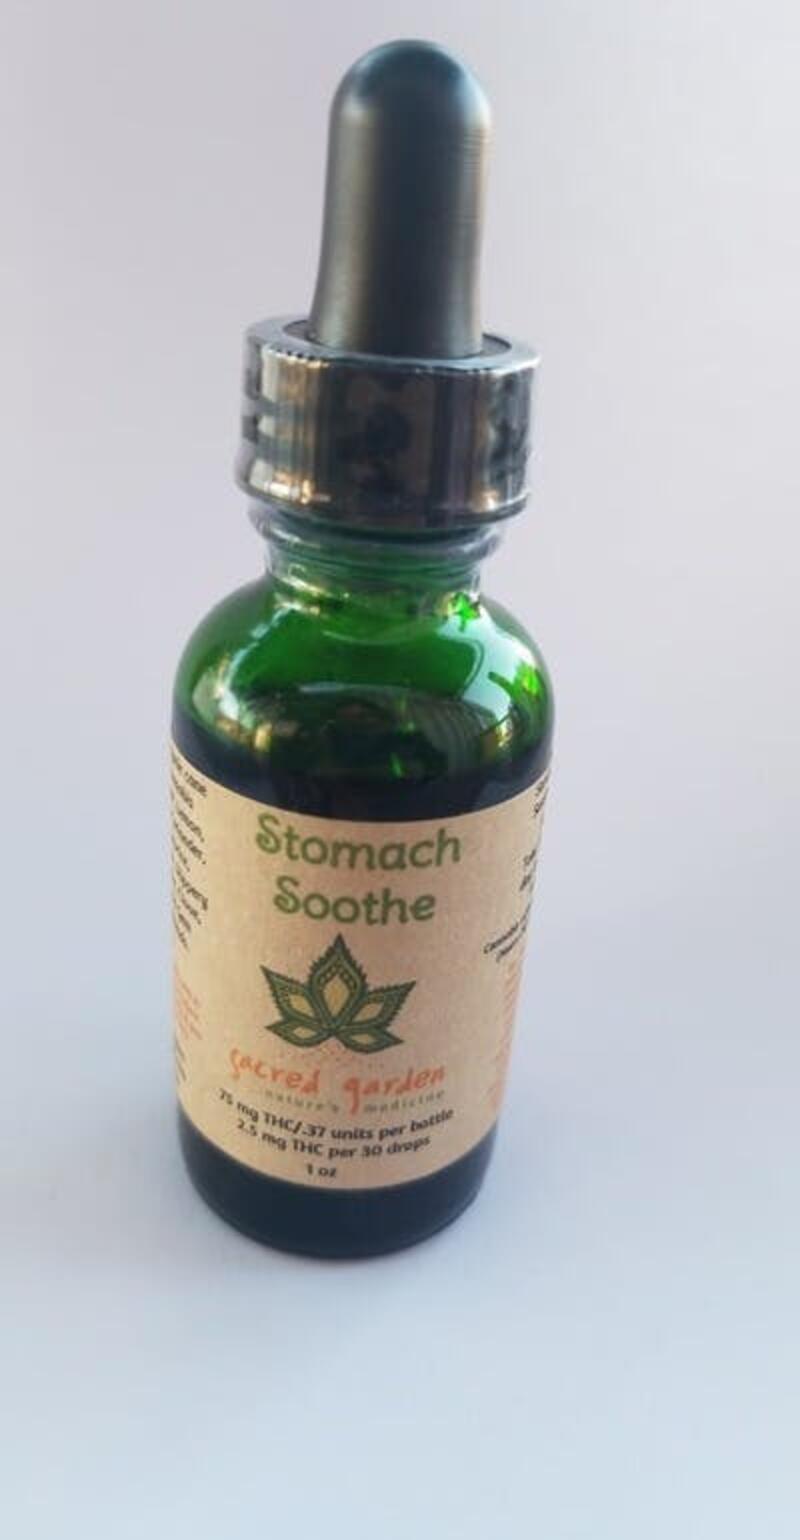 Stomach Soothe 1 oz (75 MG)